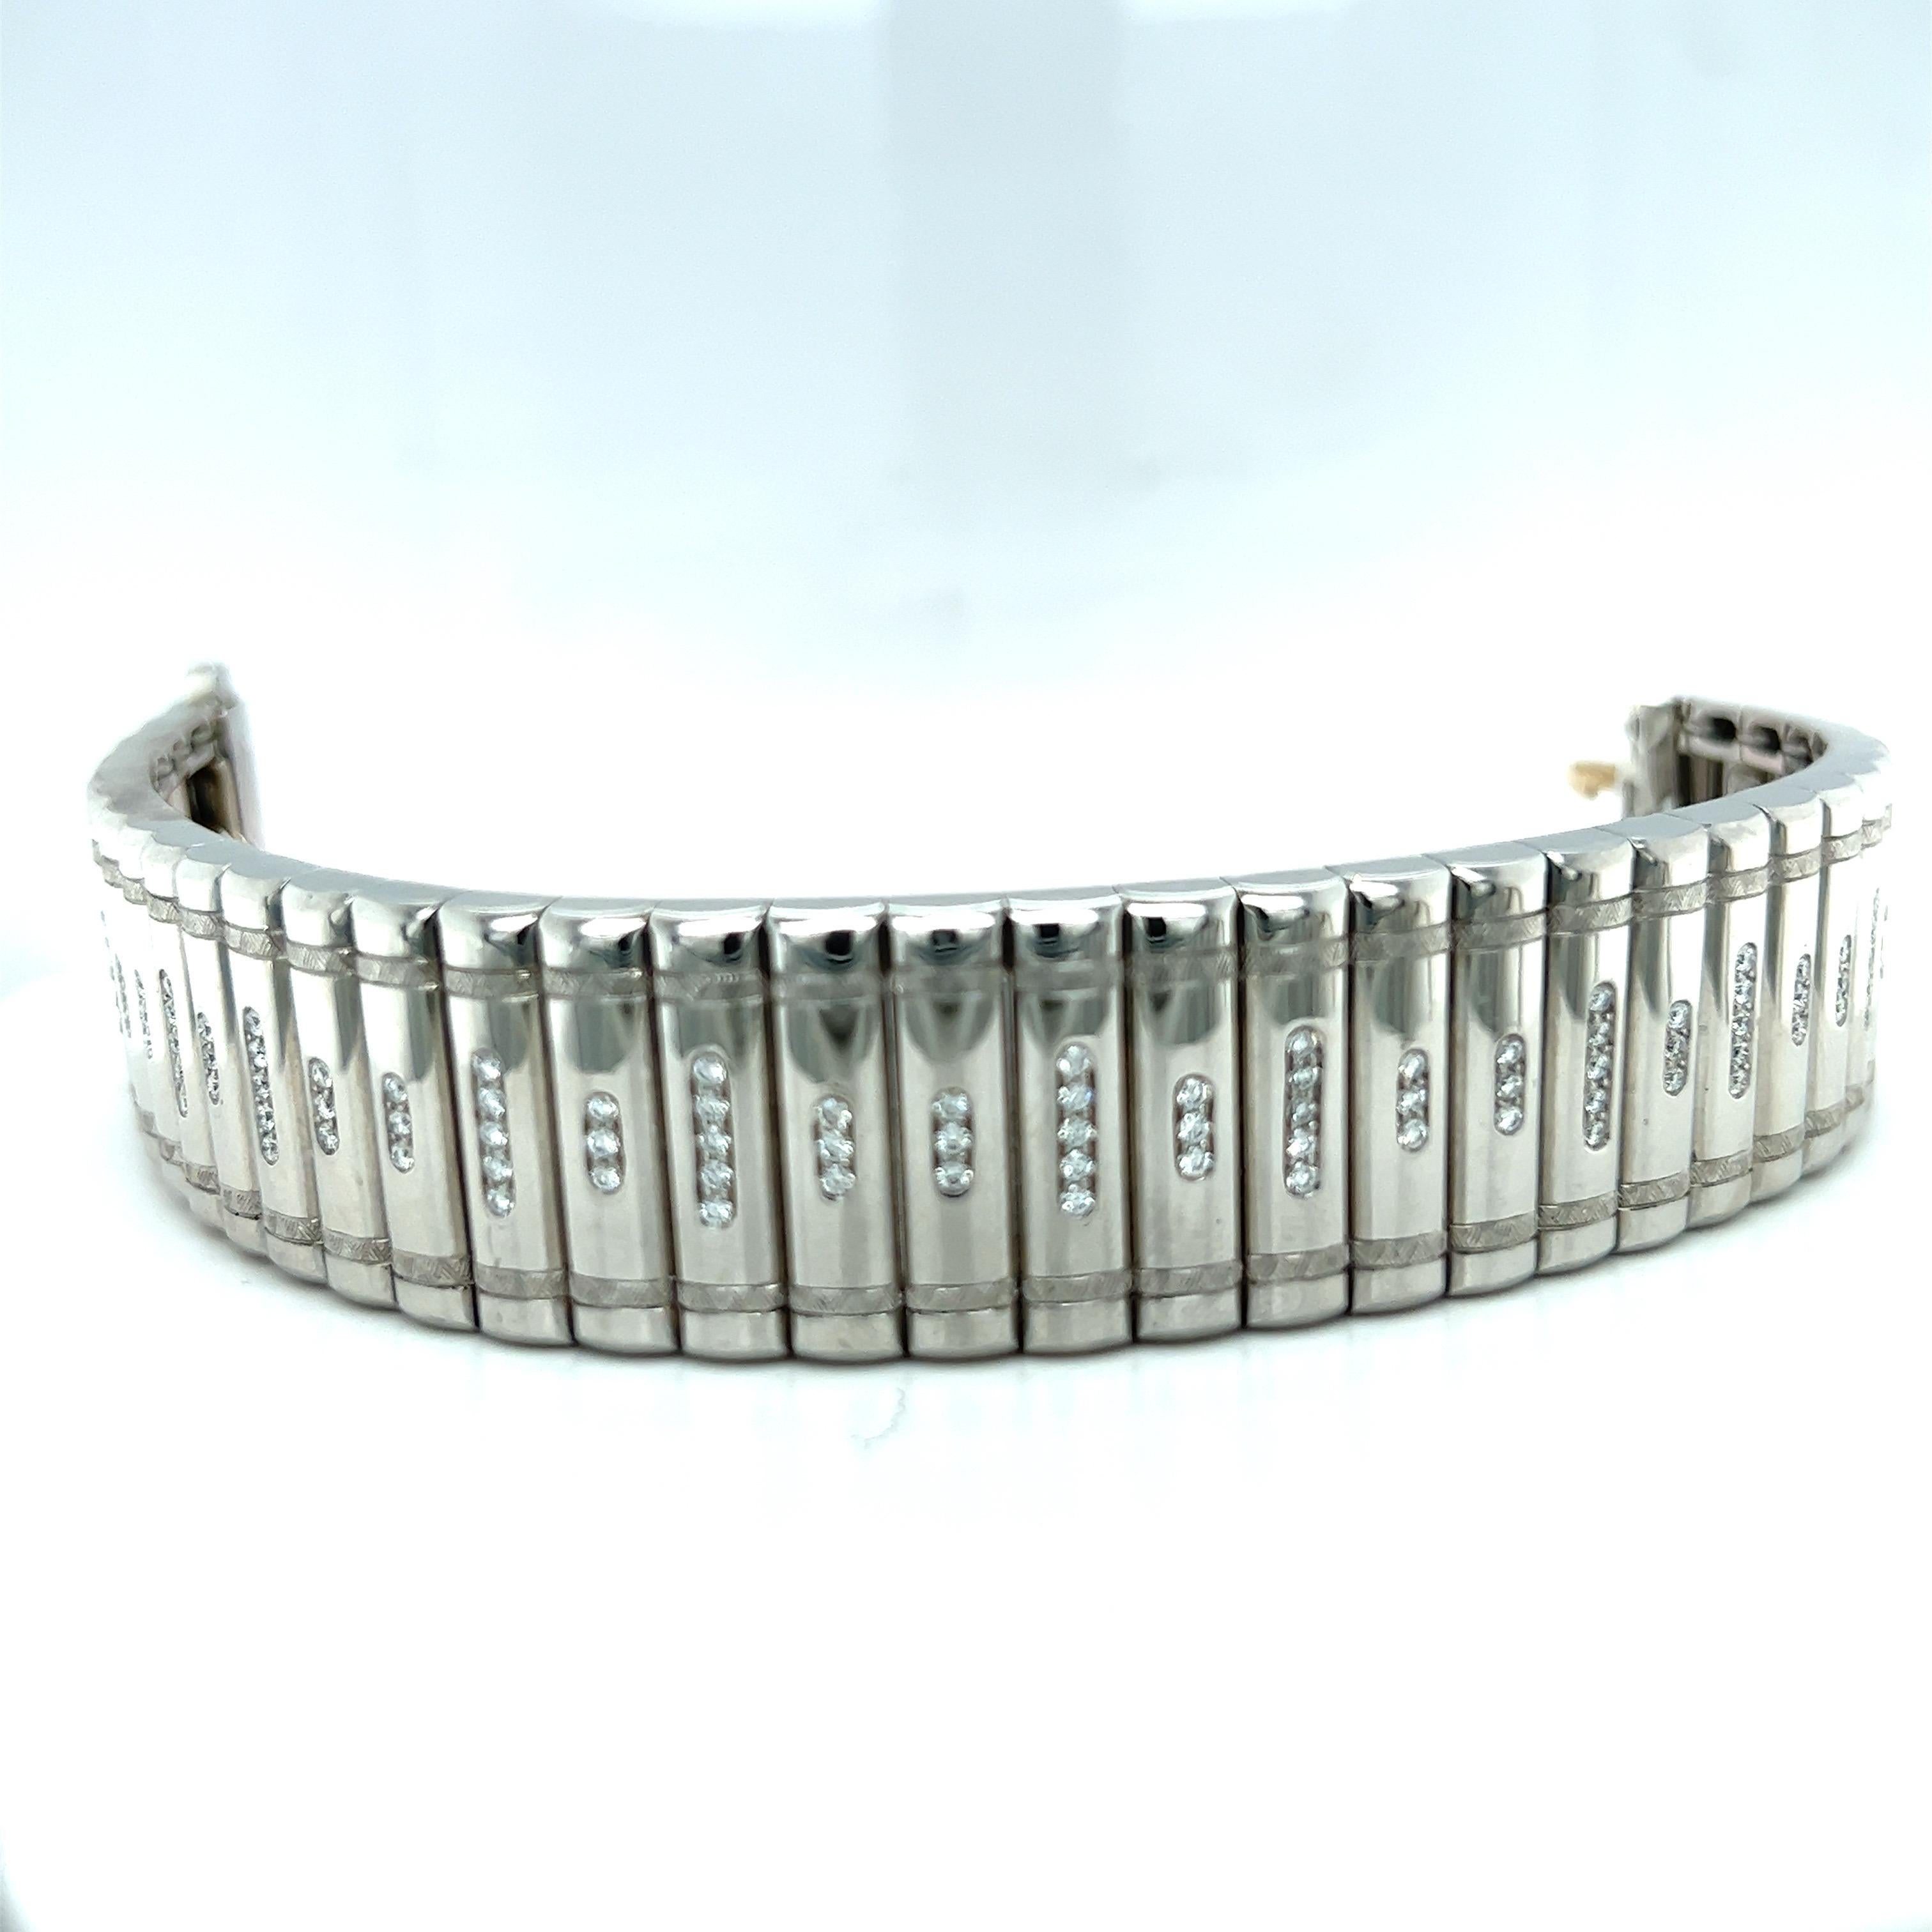 This platinum bracelet is an iconic representation of the artist, Michael Bondanza, world renowned  for his work in precious metals. Each Michael Bondanza piece is expertly hand crafted in the heart of New York City. 35 hand made links comprised of